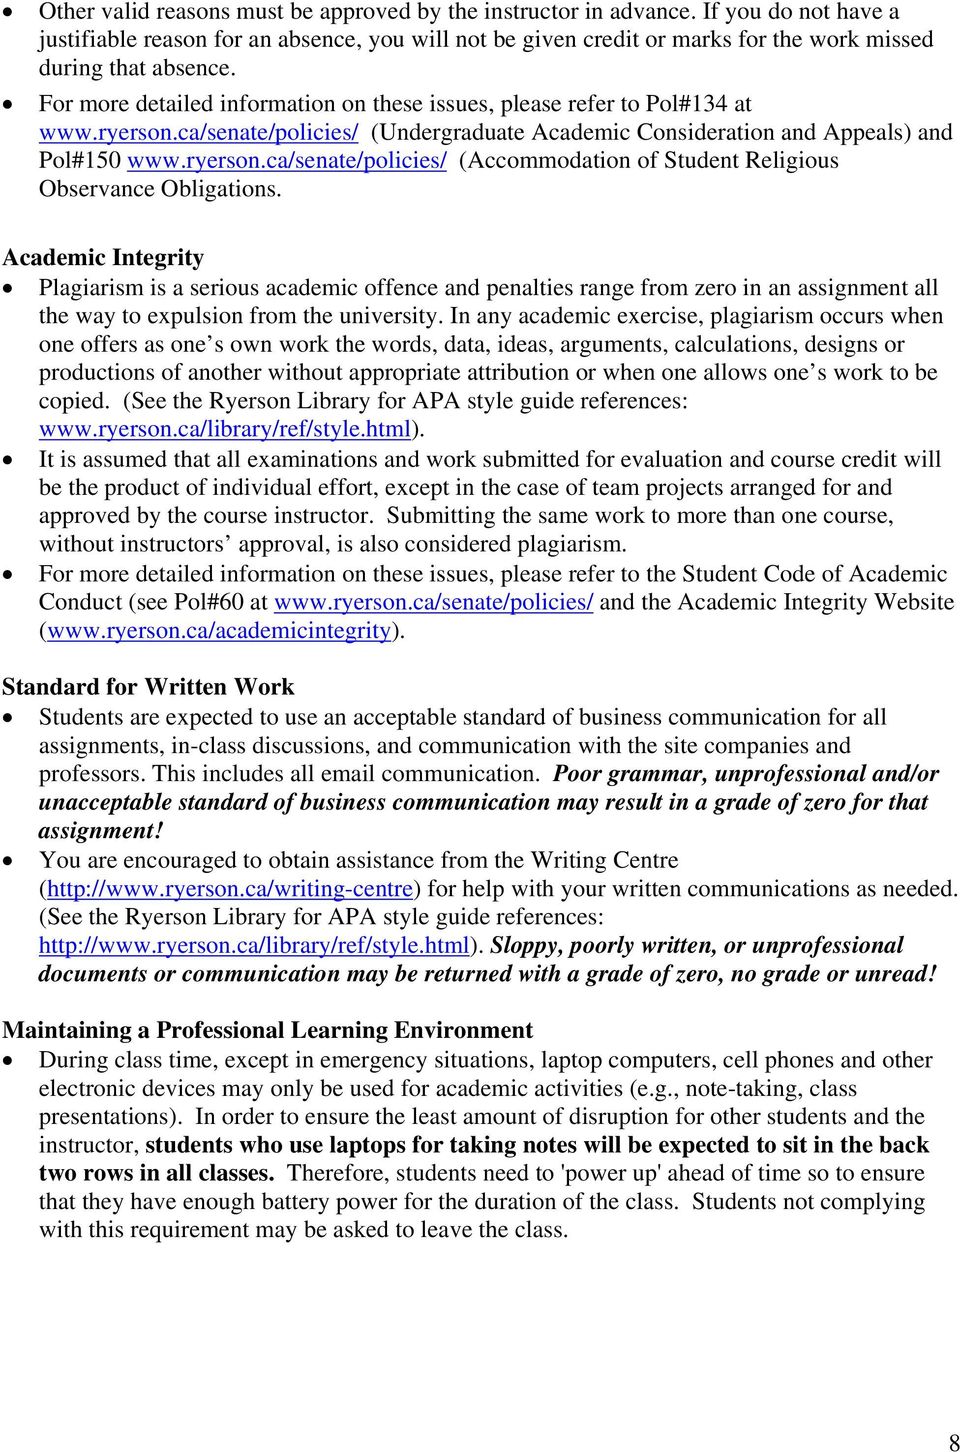 For more detailed information on these issues, please refer to Pol#134 at www.ryerson.ca/senate/policies/ (Undergraduate Academic Consideration and Appeals) and Pol#150 www.ryerson.ca/senate/policies/ (Accommodation of Student Religious Observance Obligations.